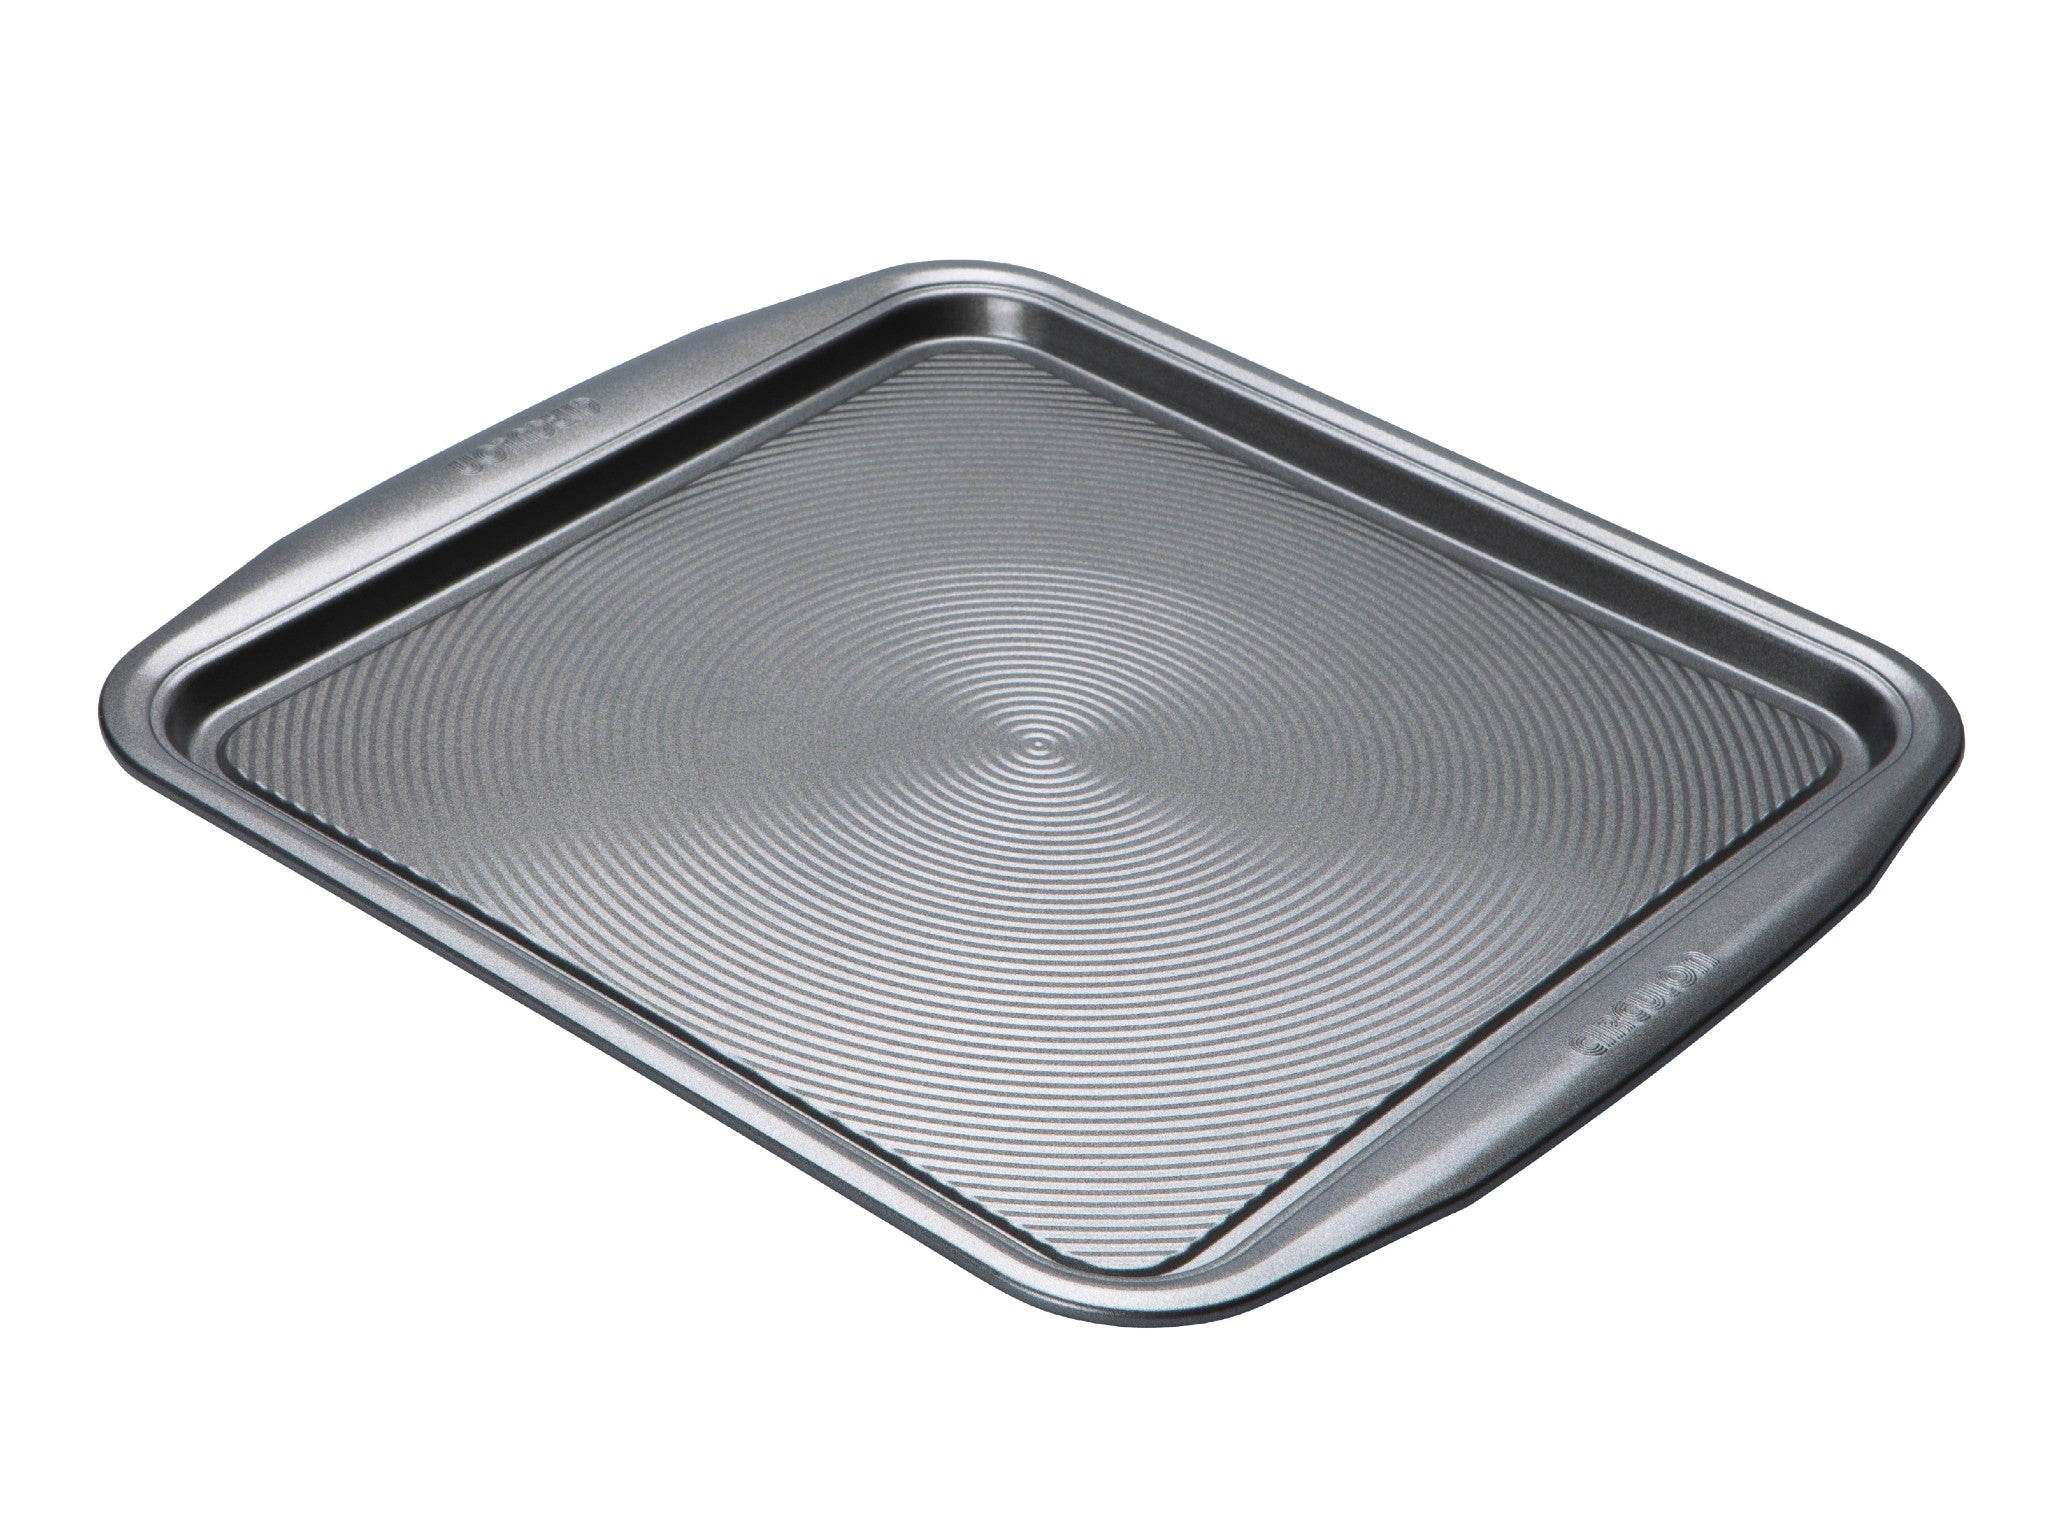 Circulon momentum square baking tray  indybest